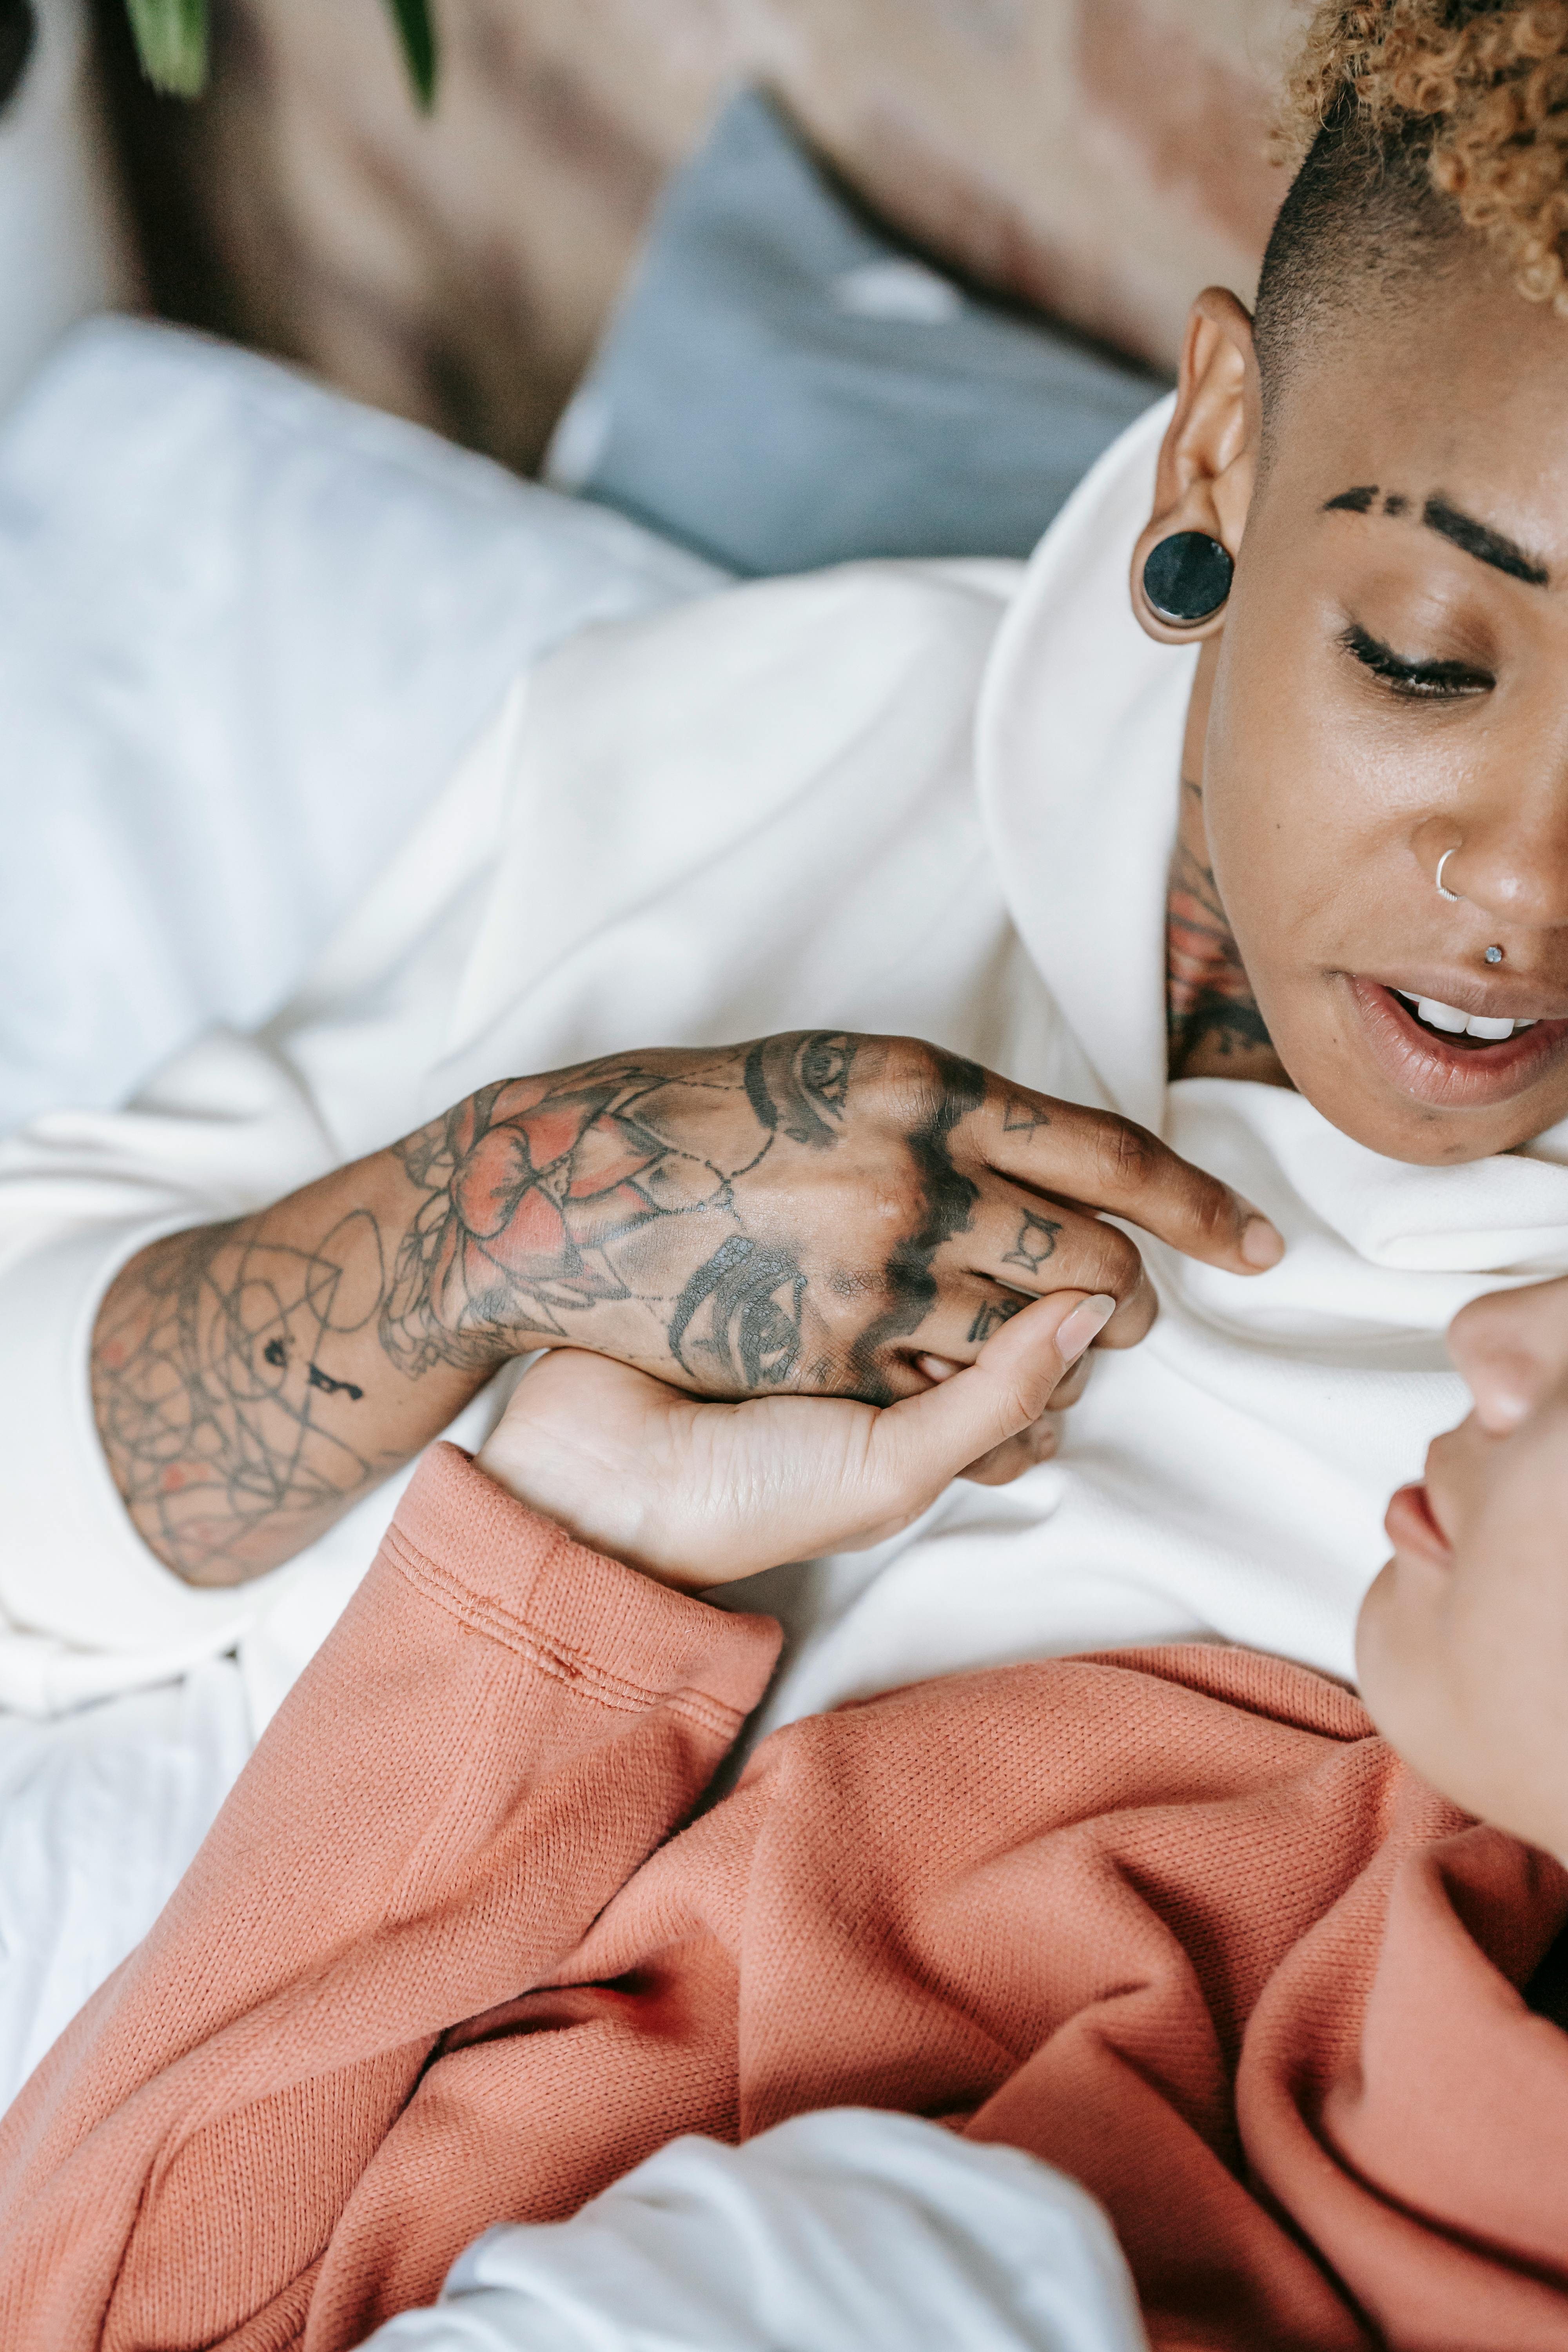 crop diverse couple of lesbian women embracing on bed